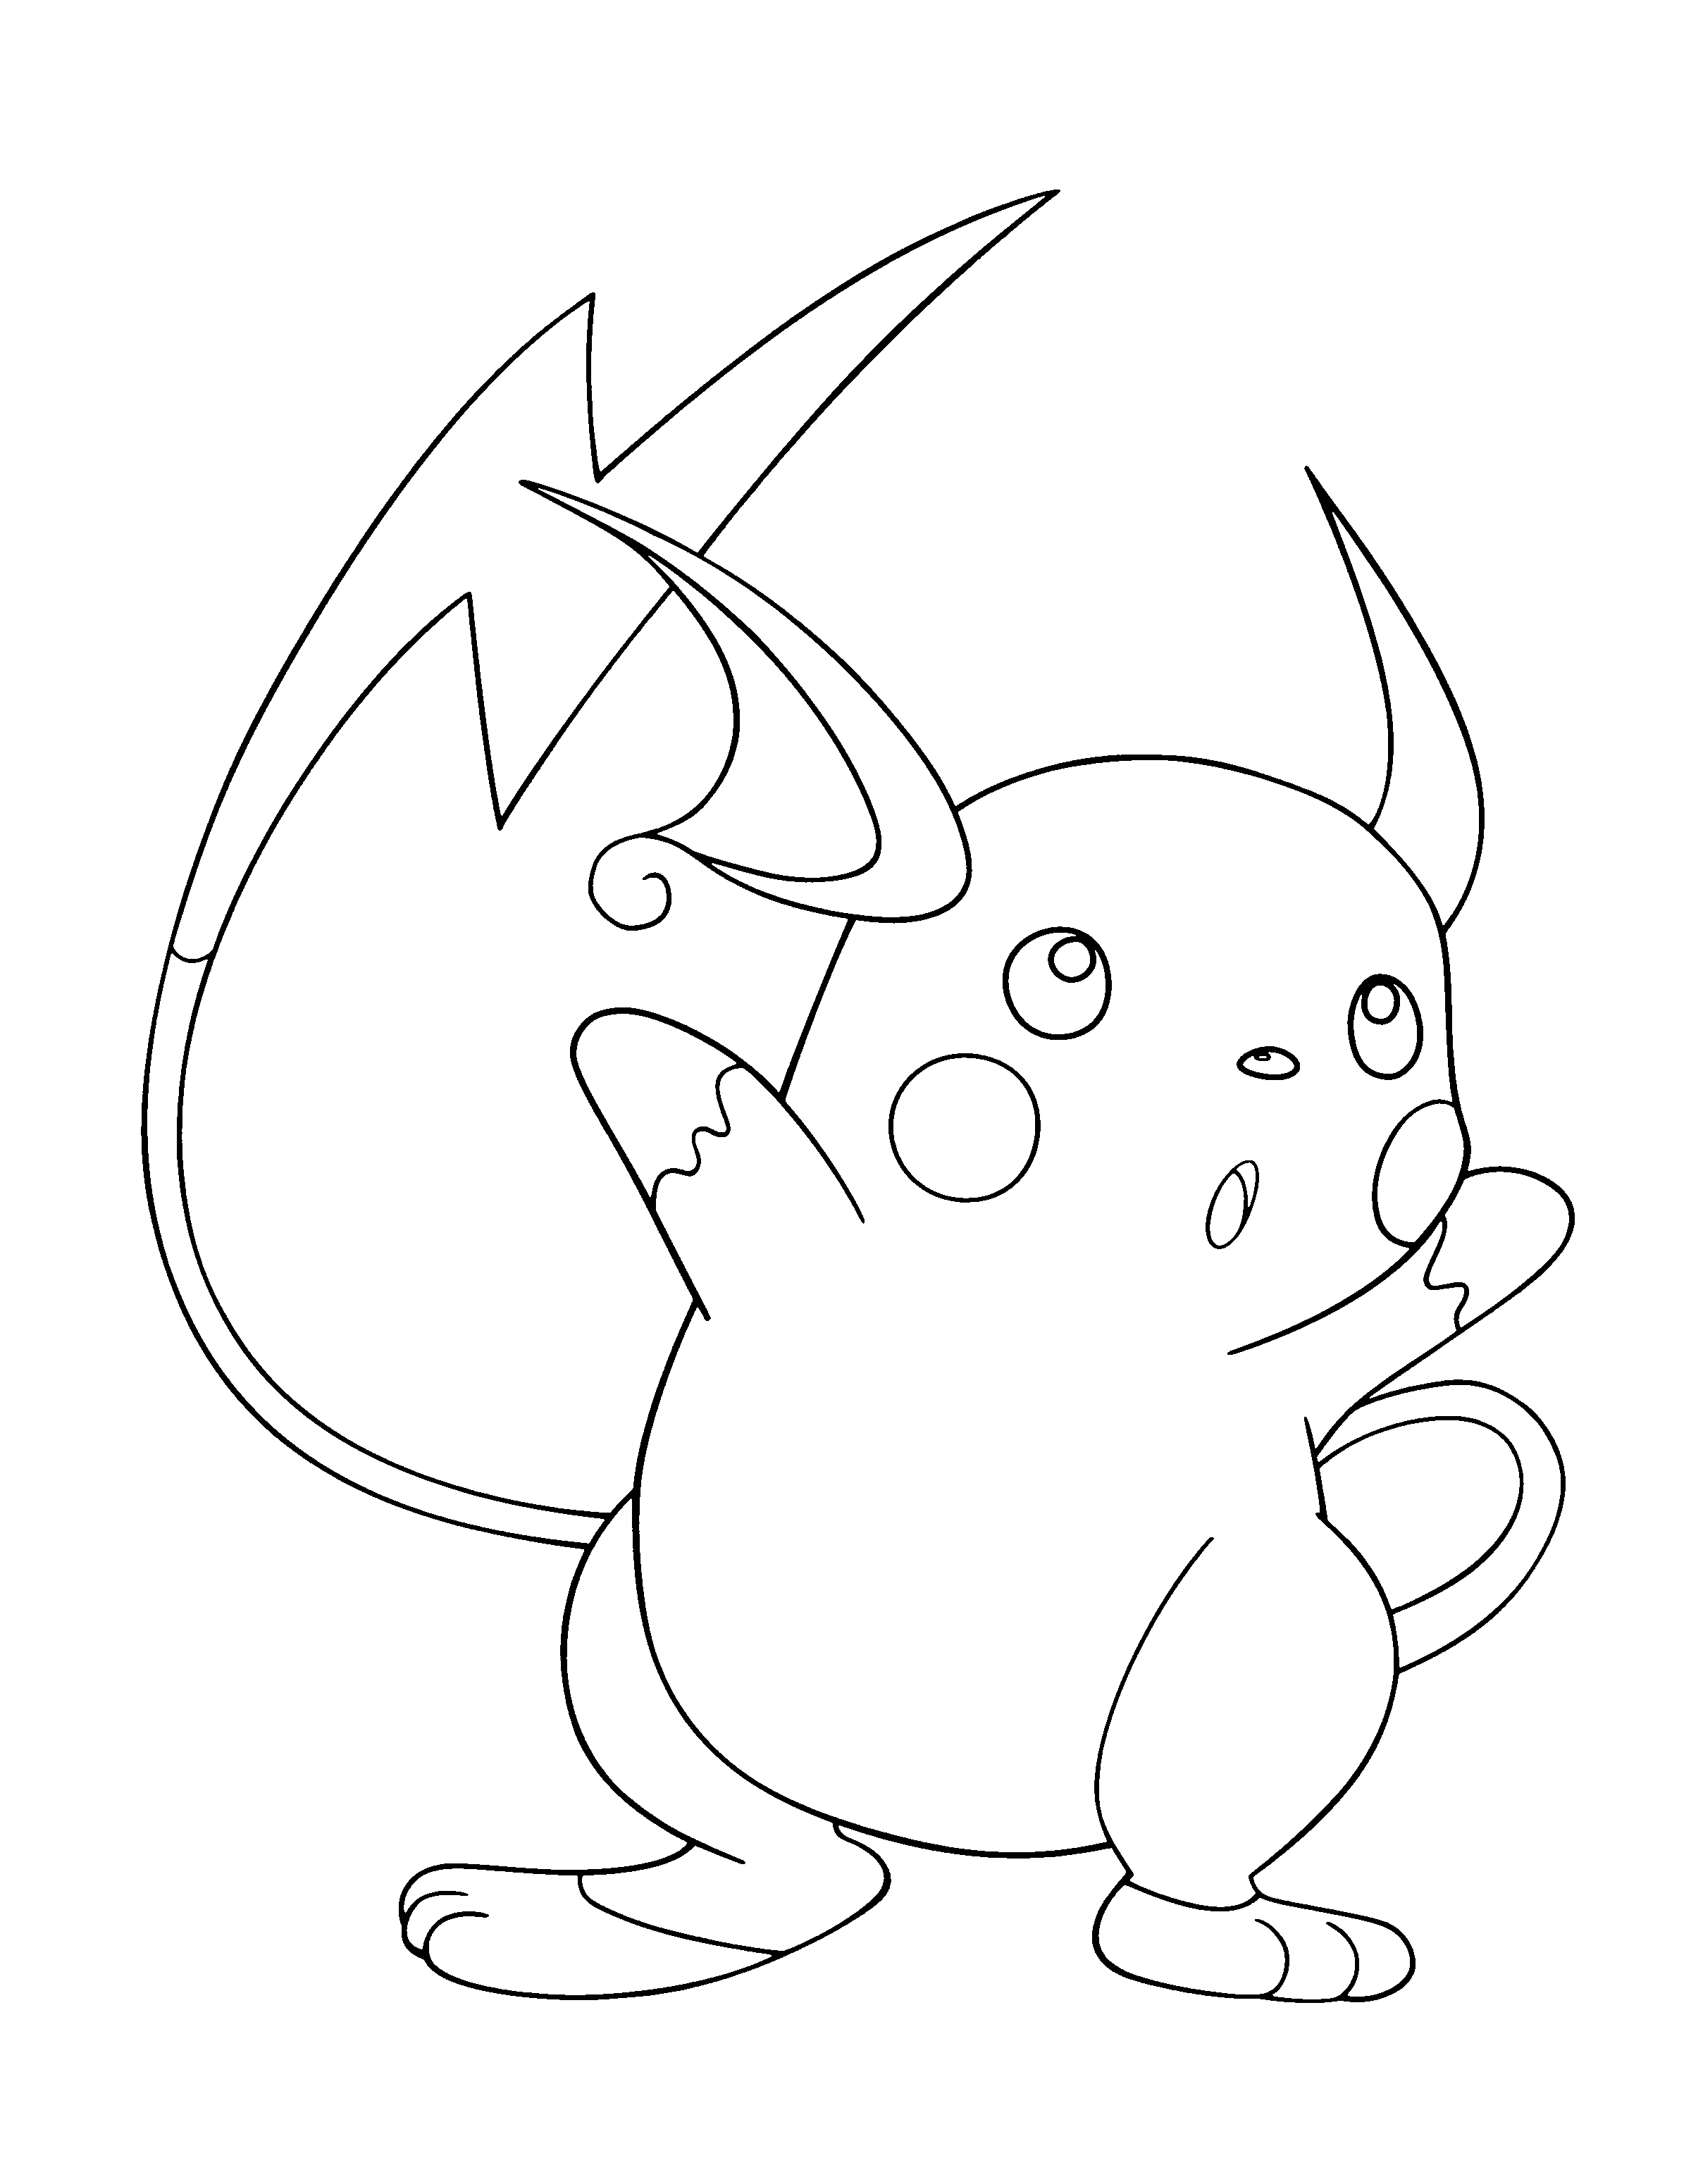 Pokemon advanced Coloring Pages